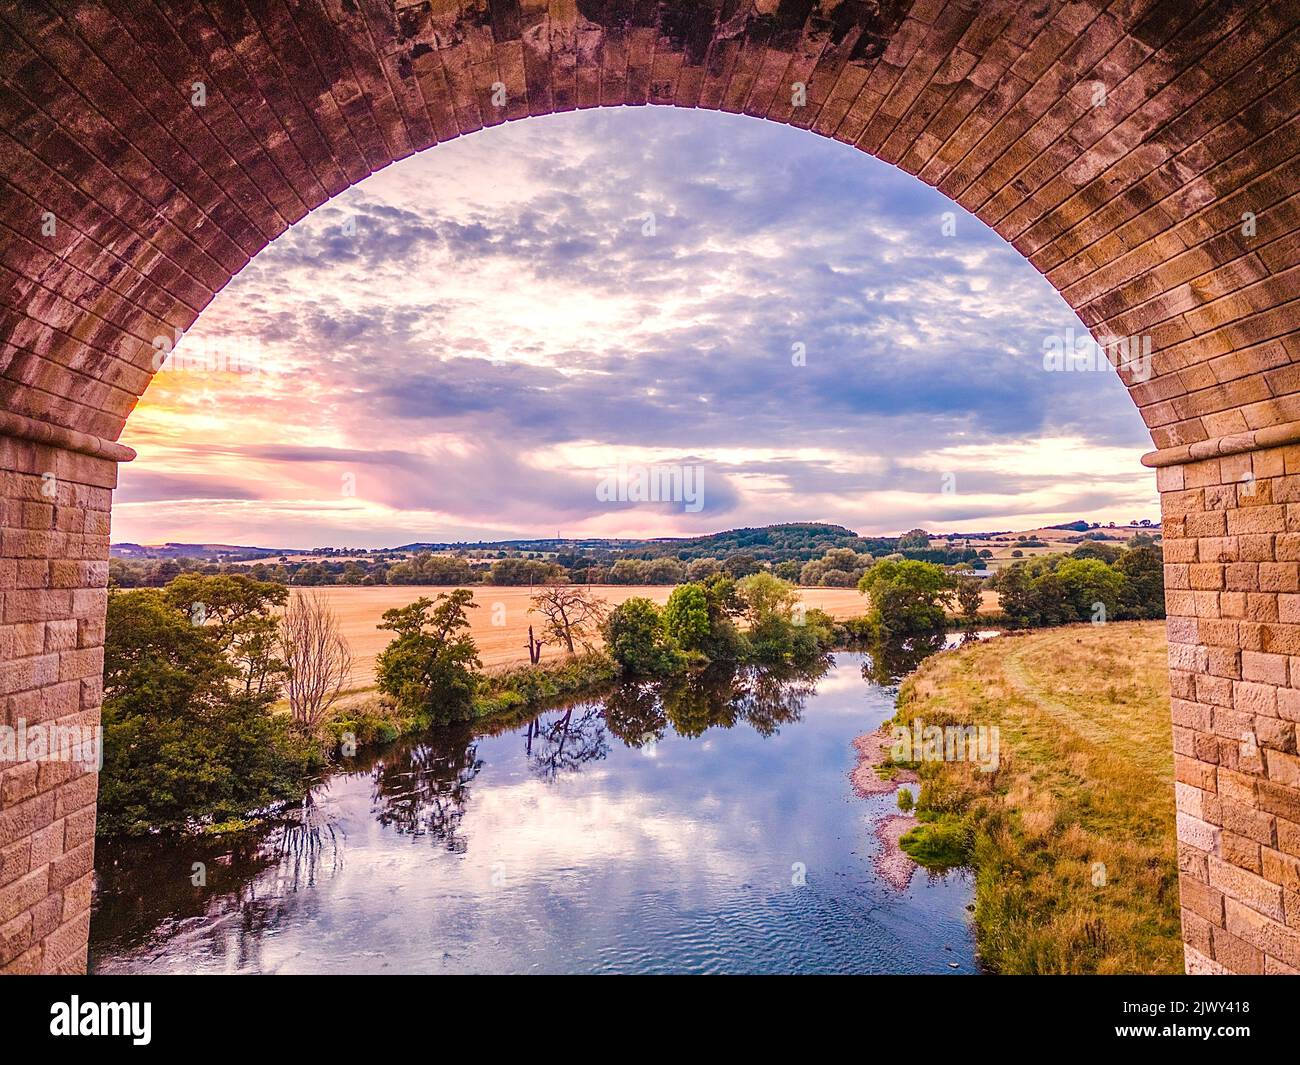 Aerial view through an arch of Arthington Viaduct upriver on River Wharfe Stock Photo